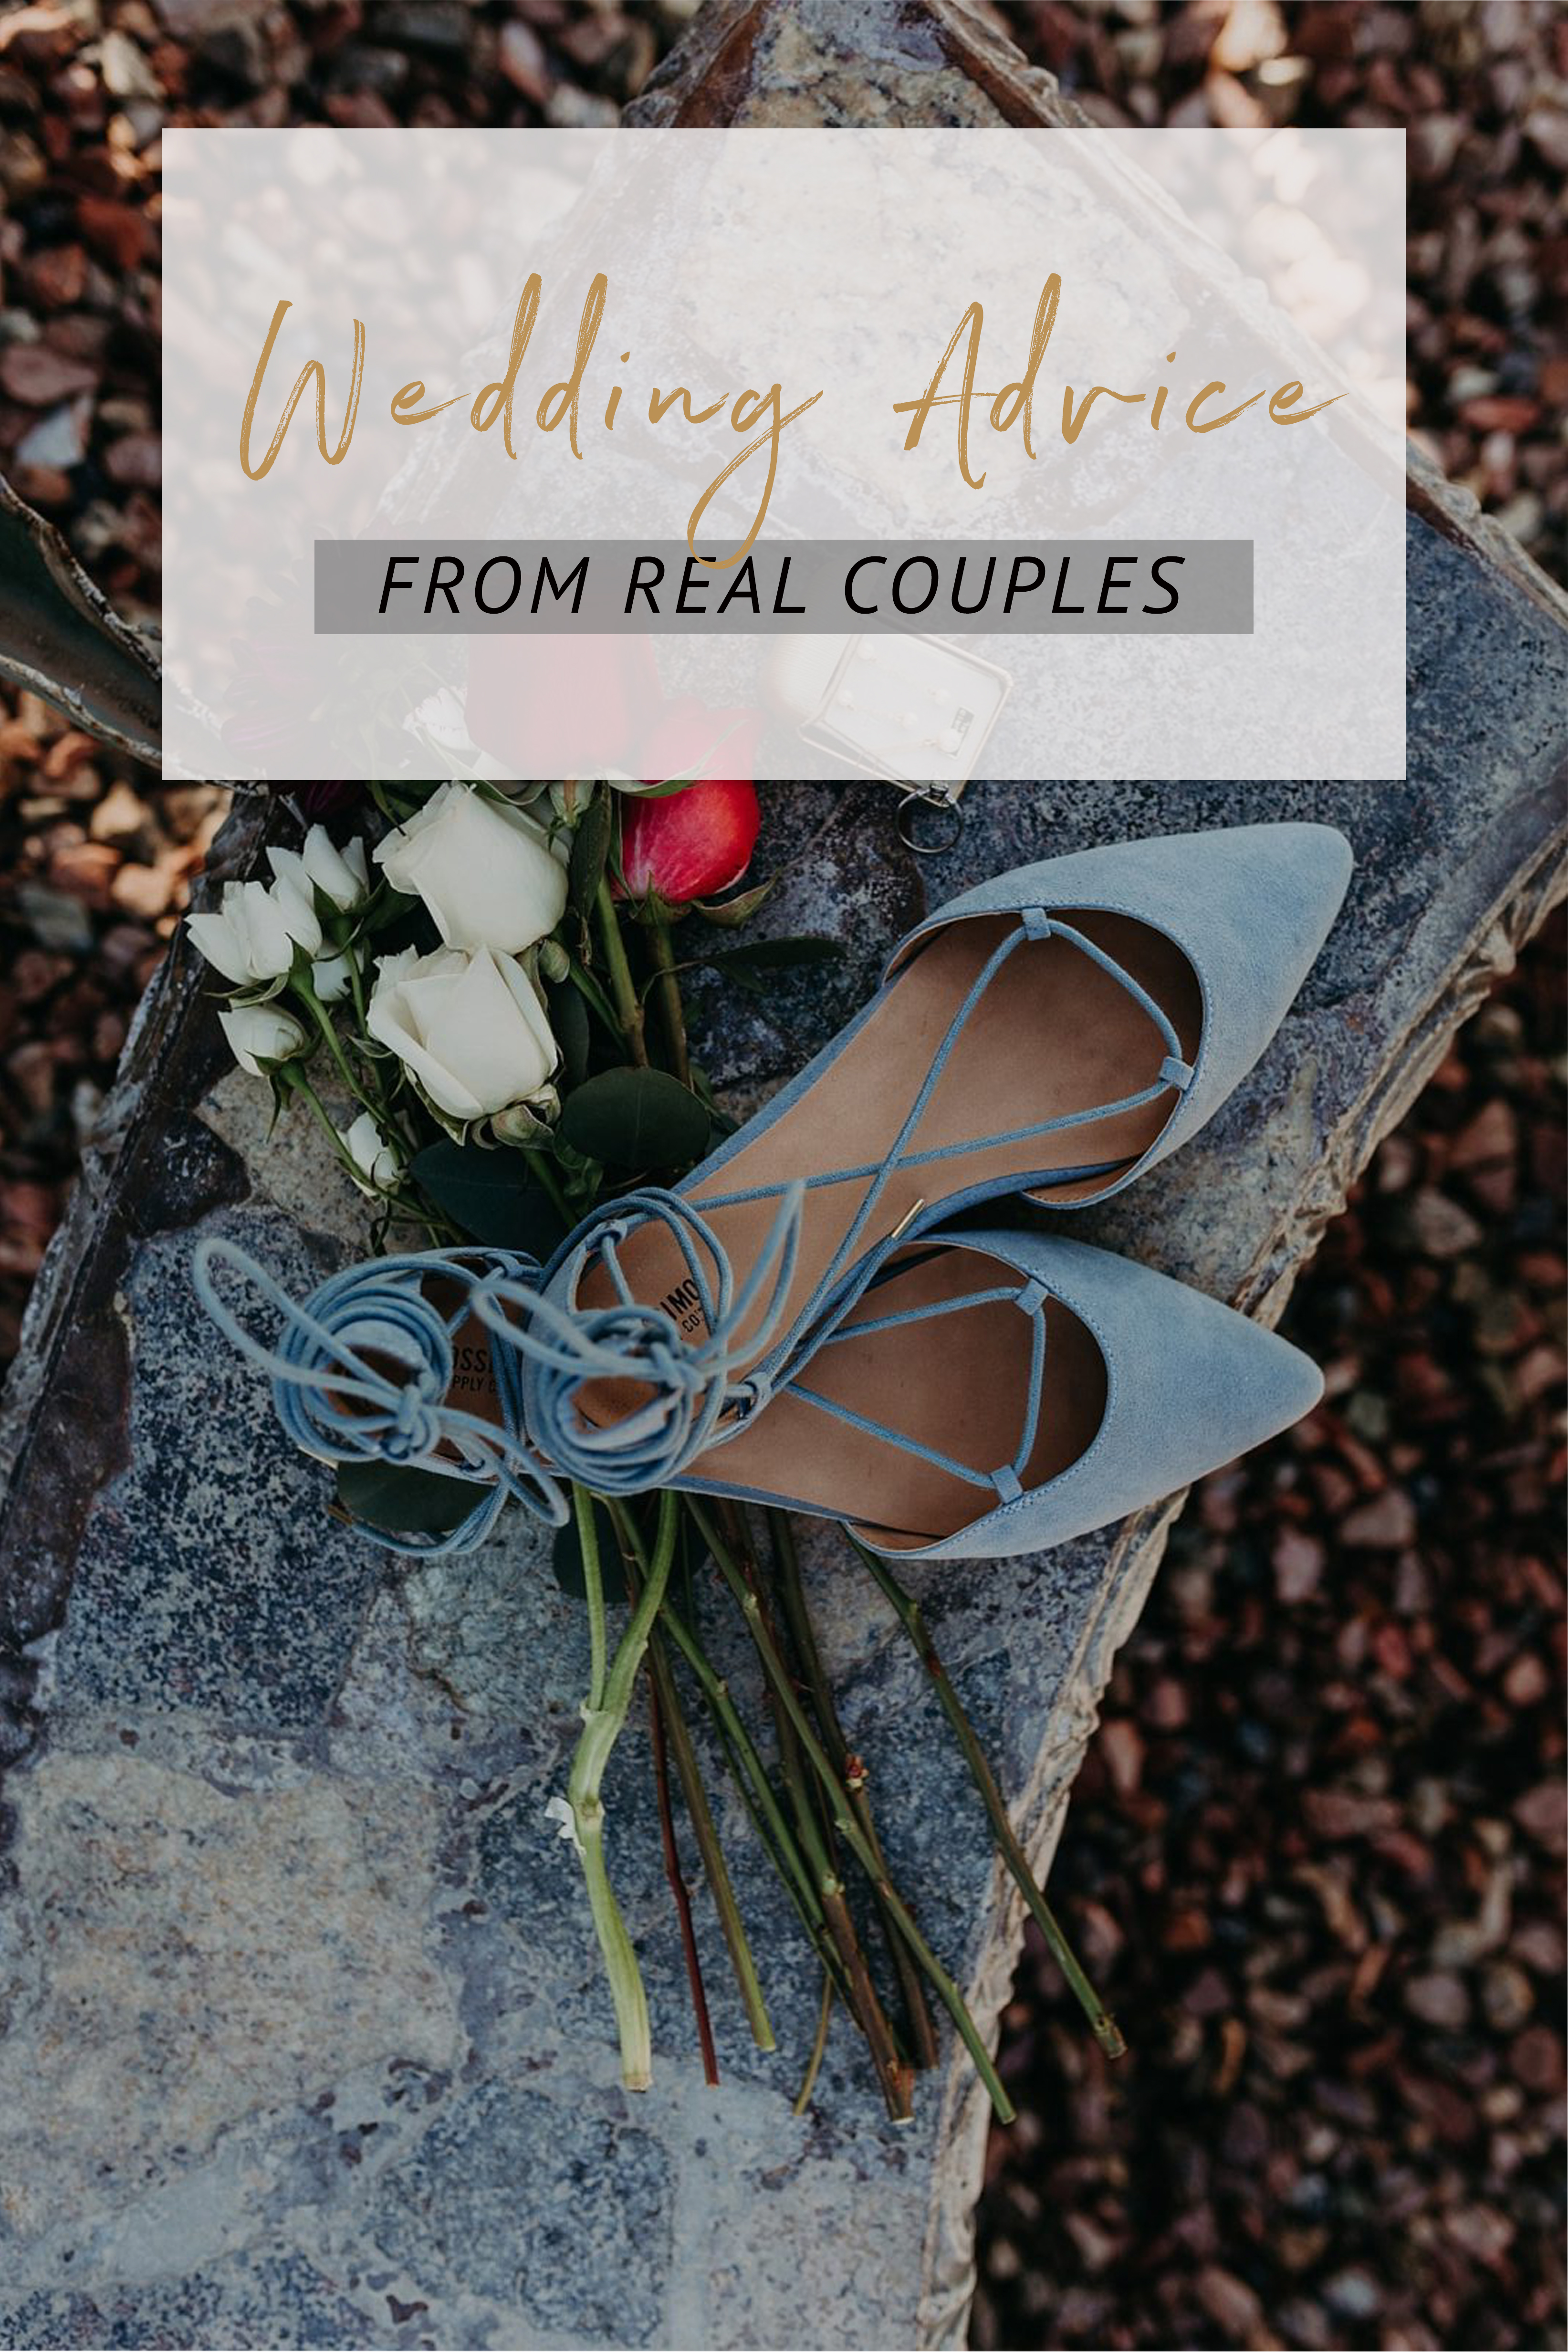 Wedding Advice From Real Couples